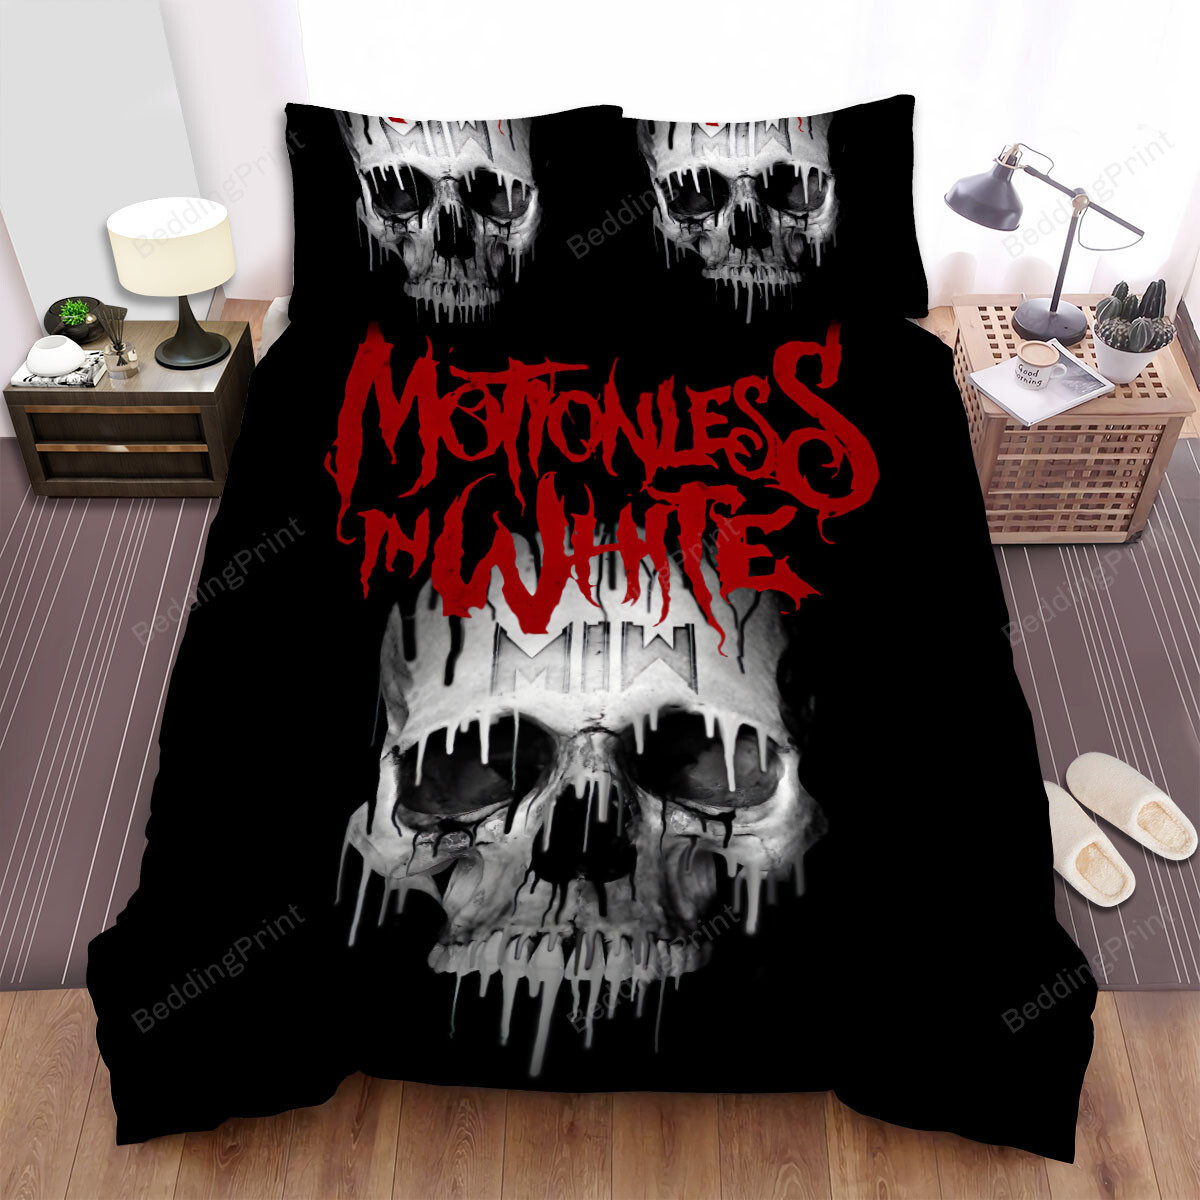 Motionless In White Music Band Miw Logo Bed Sheets Duvet Cover Bedding Sets